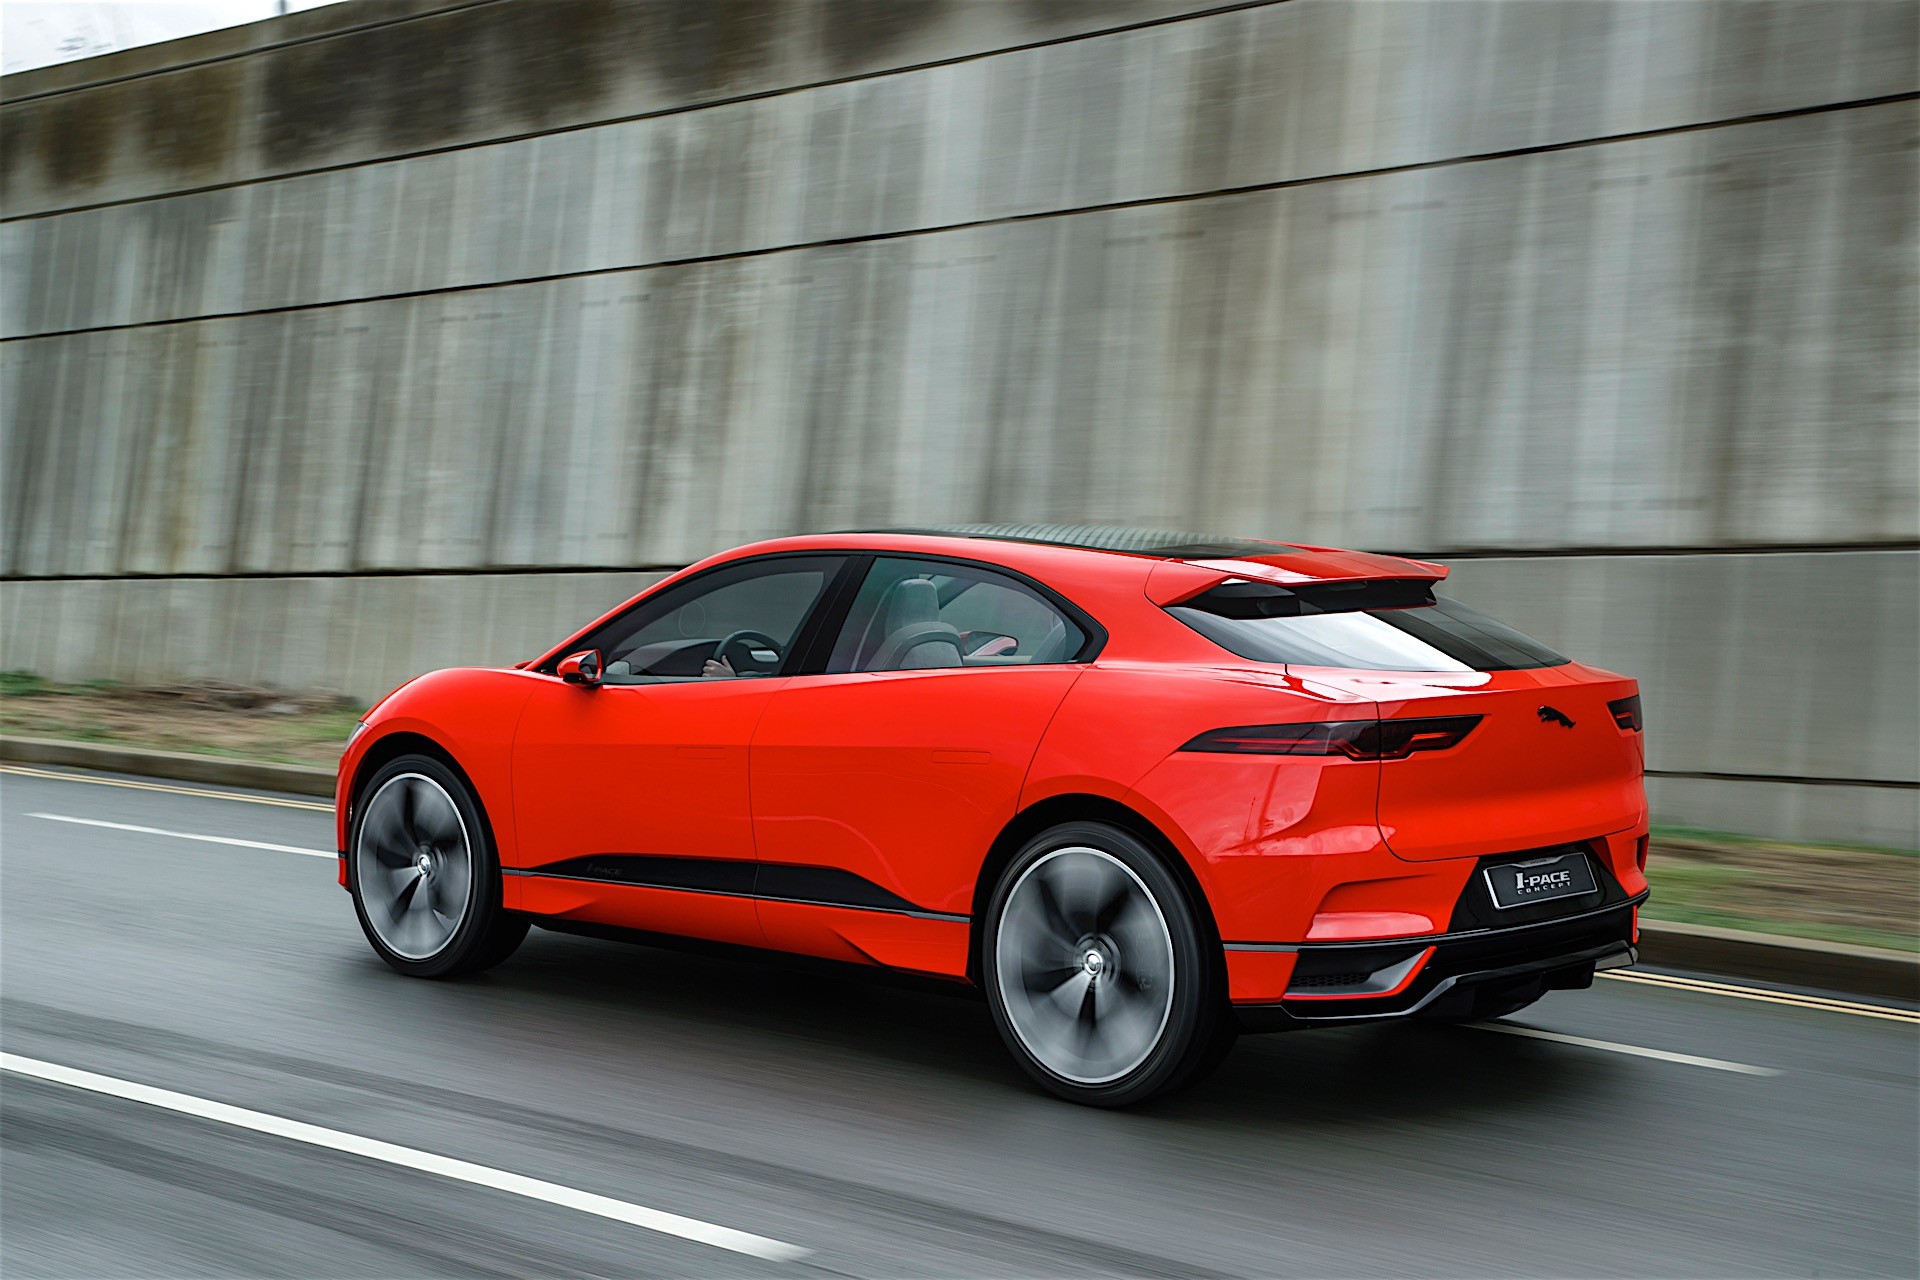 2019 Jaguar I-PACE Price Revealed as the Electric Crossover's Launch Gets Closer - autoevolution